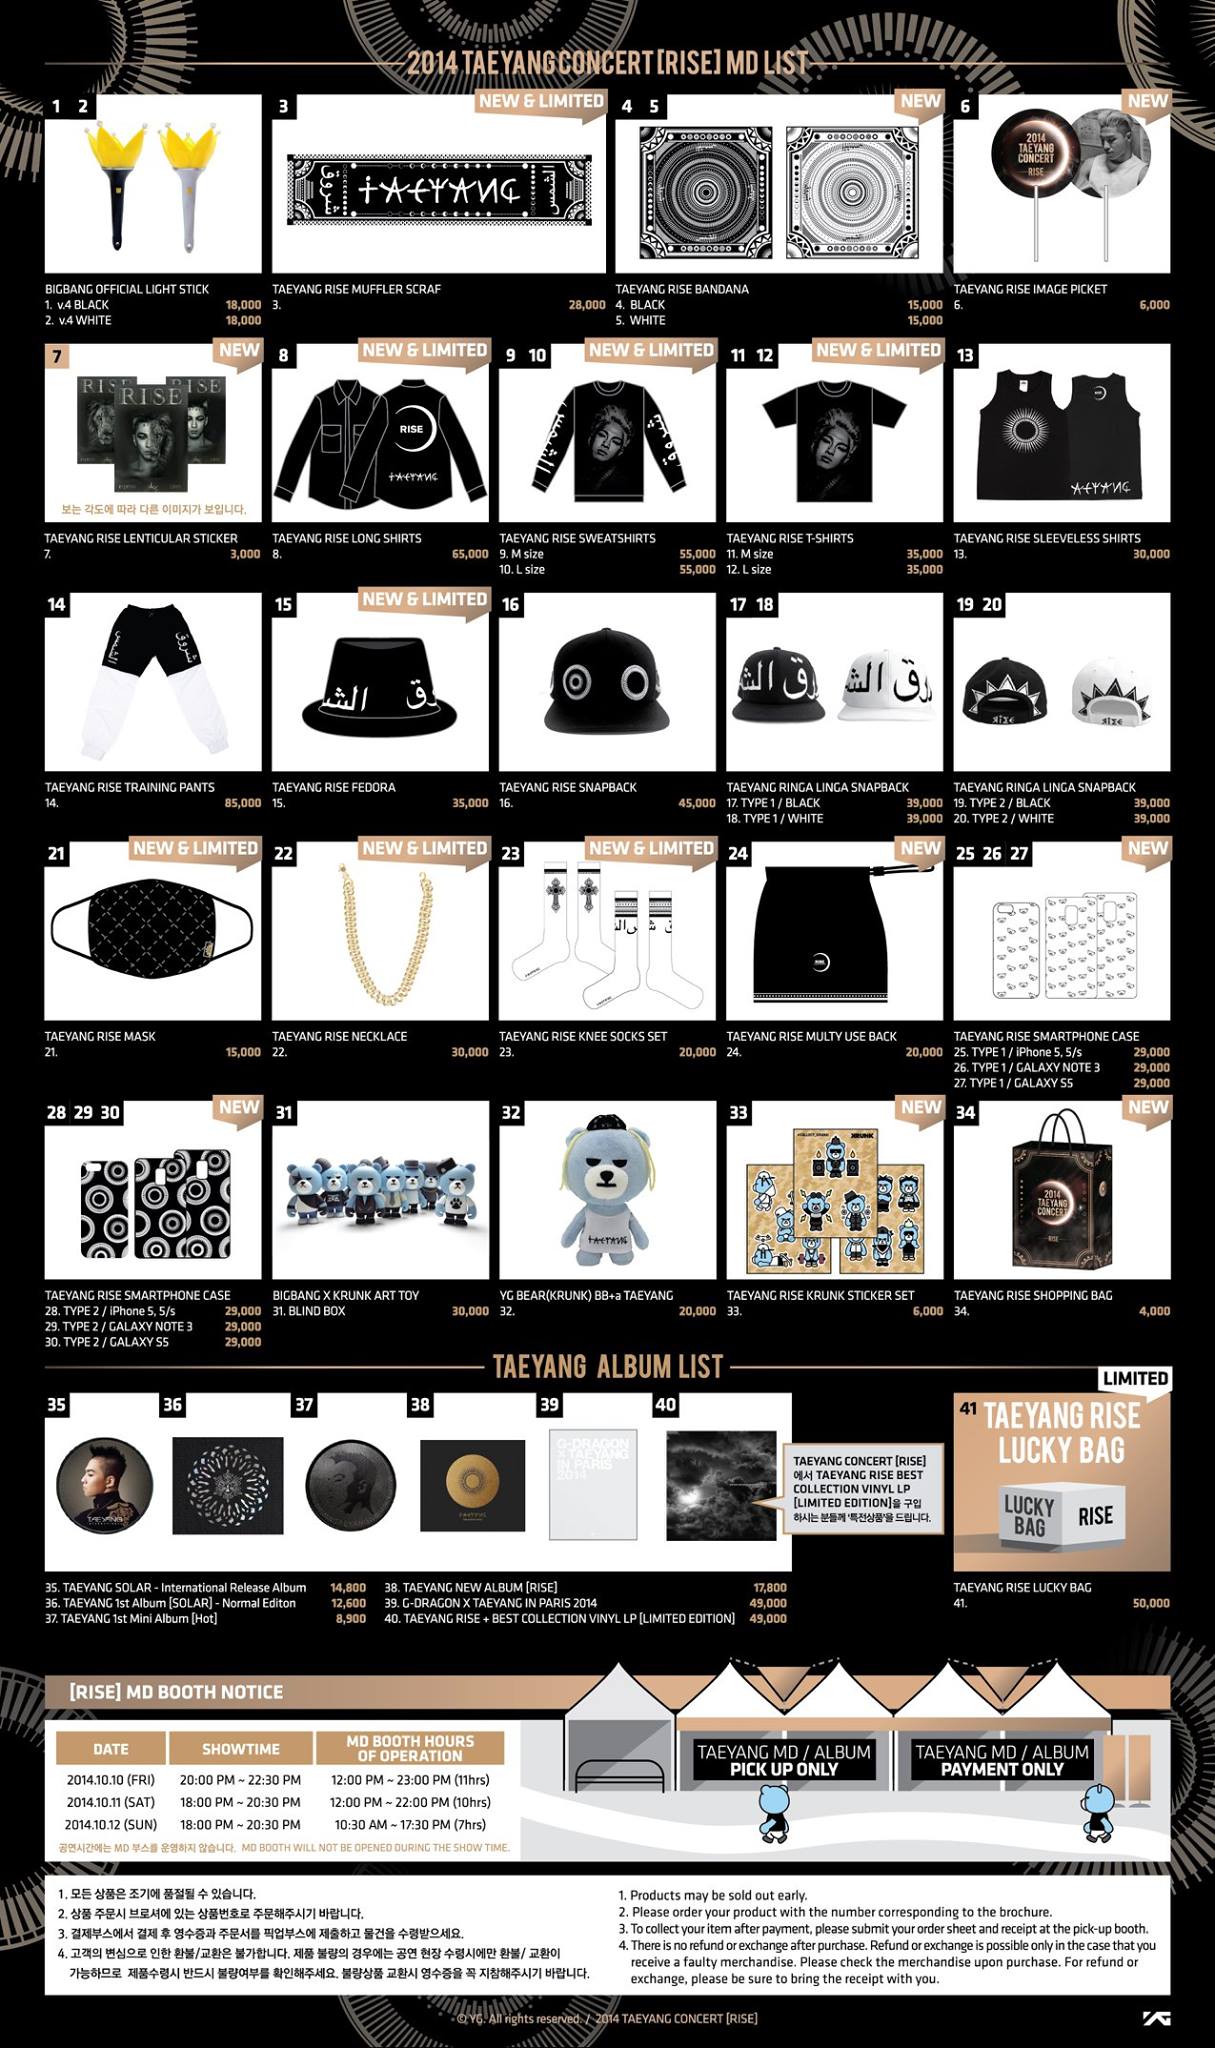 Merchandise] Taeyang Merch list for RISE concerts in Seoul 2014